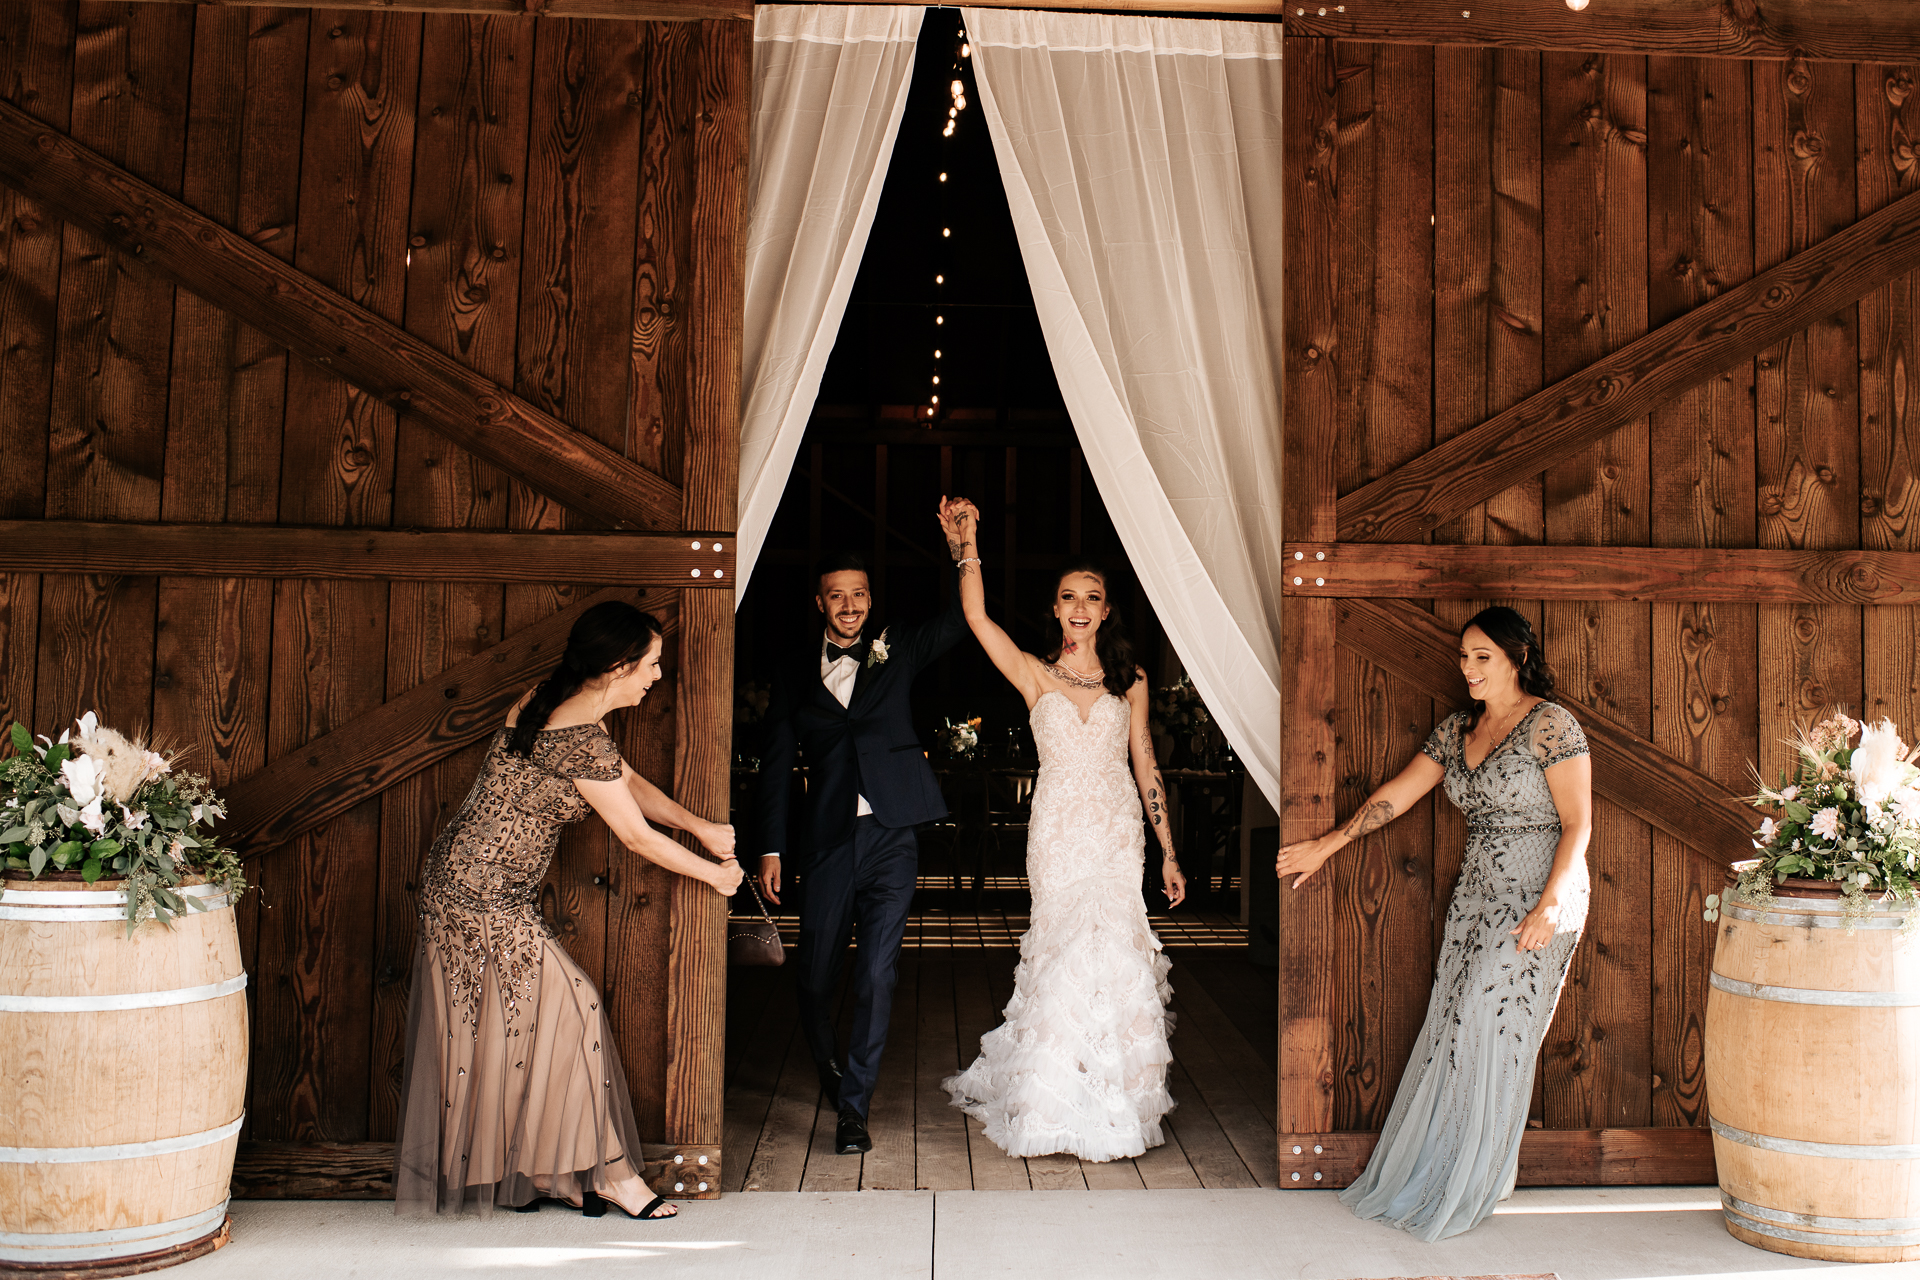 Bride and Groom get announced through barn doors at their wedding reception